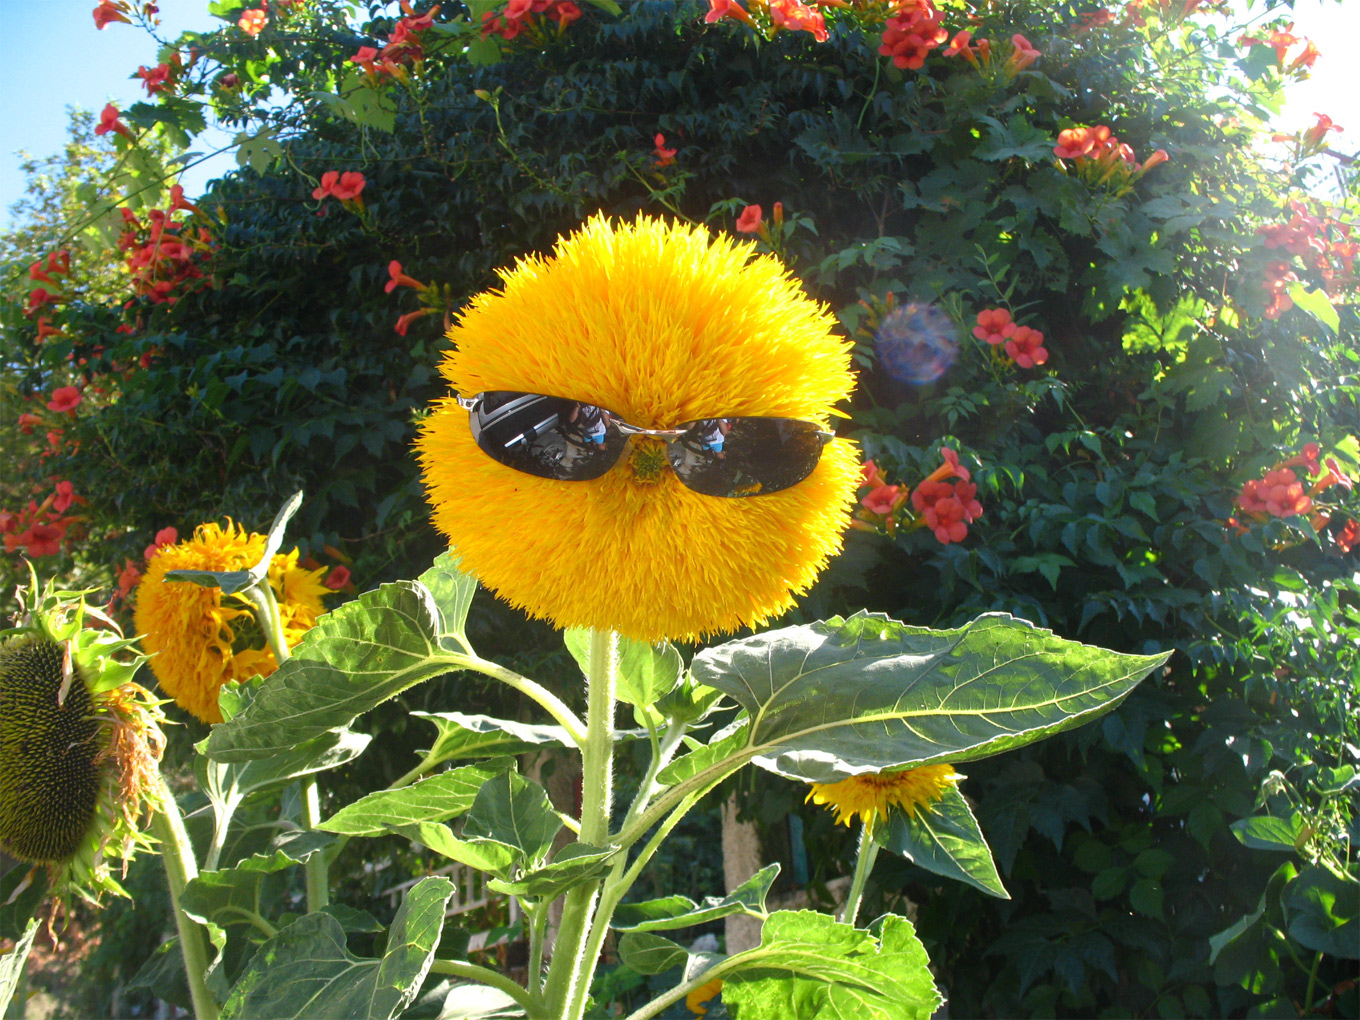 http://bizwebsolutions.co.uk/wp-content/gallery/demonstration-image-gallery/funny-flower.jpg